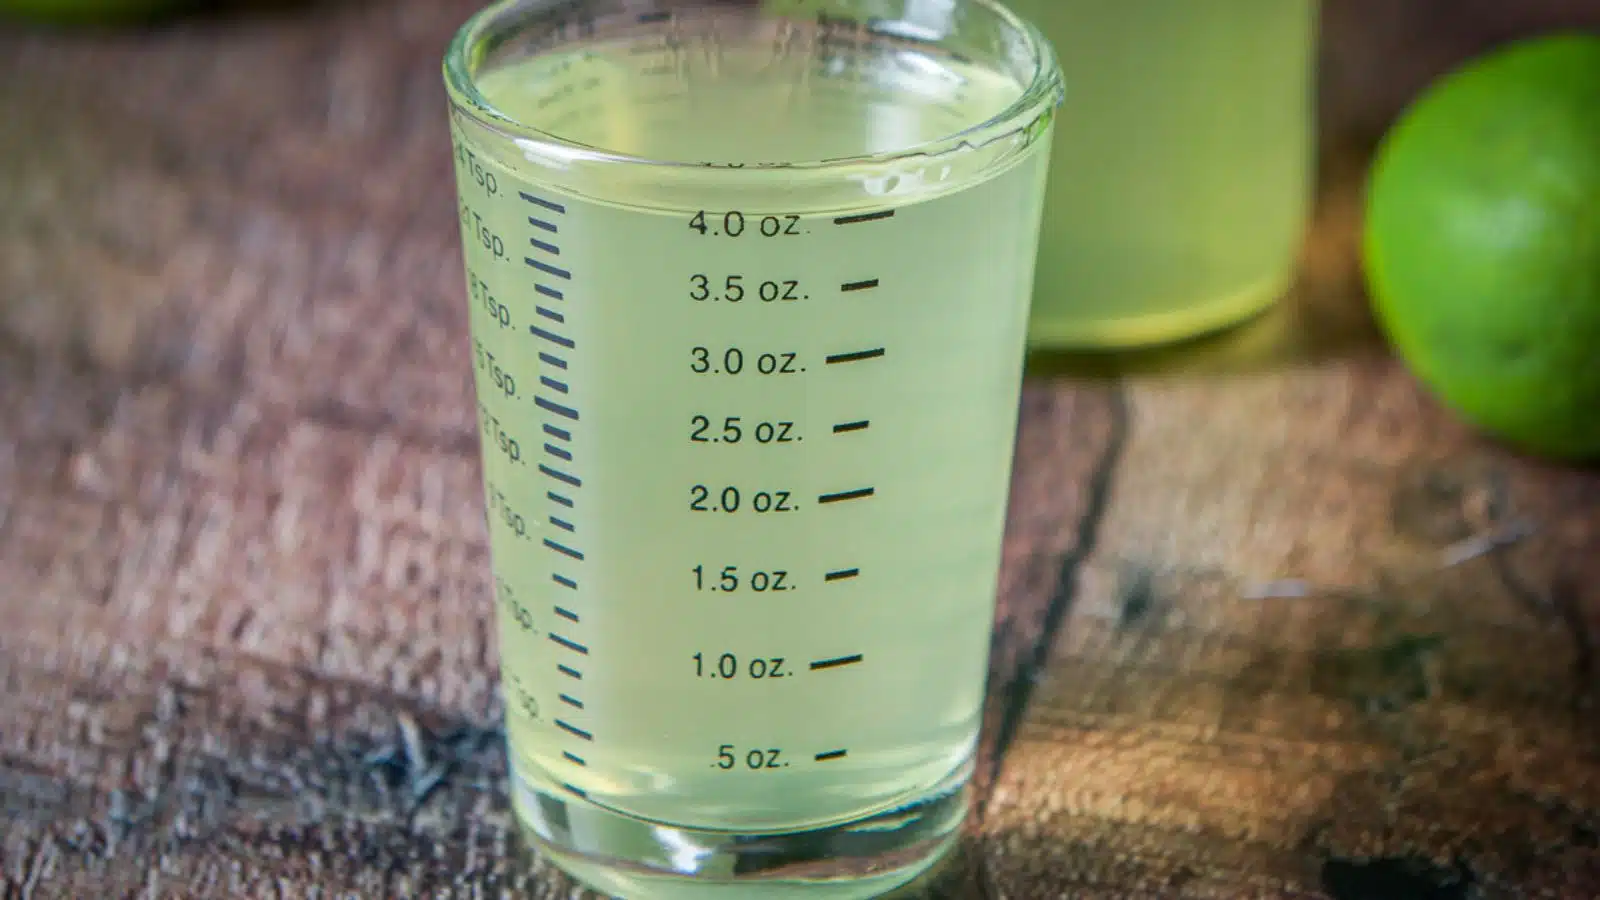 A four ounce measuring glass filled with the lime vodka